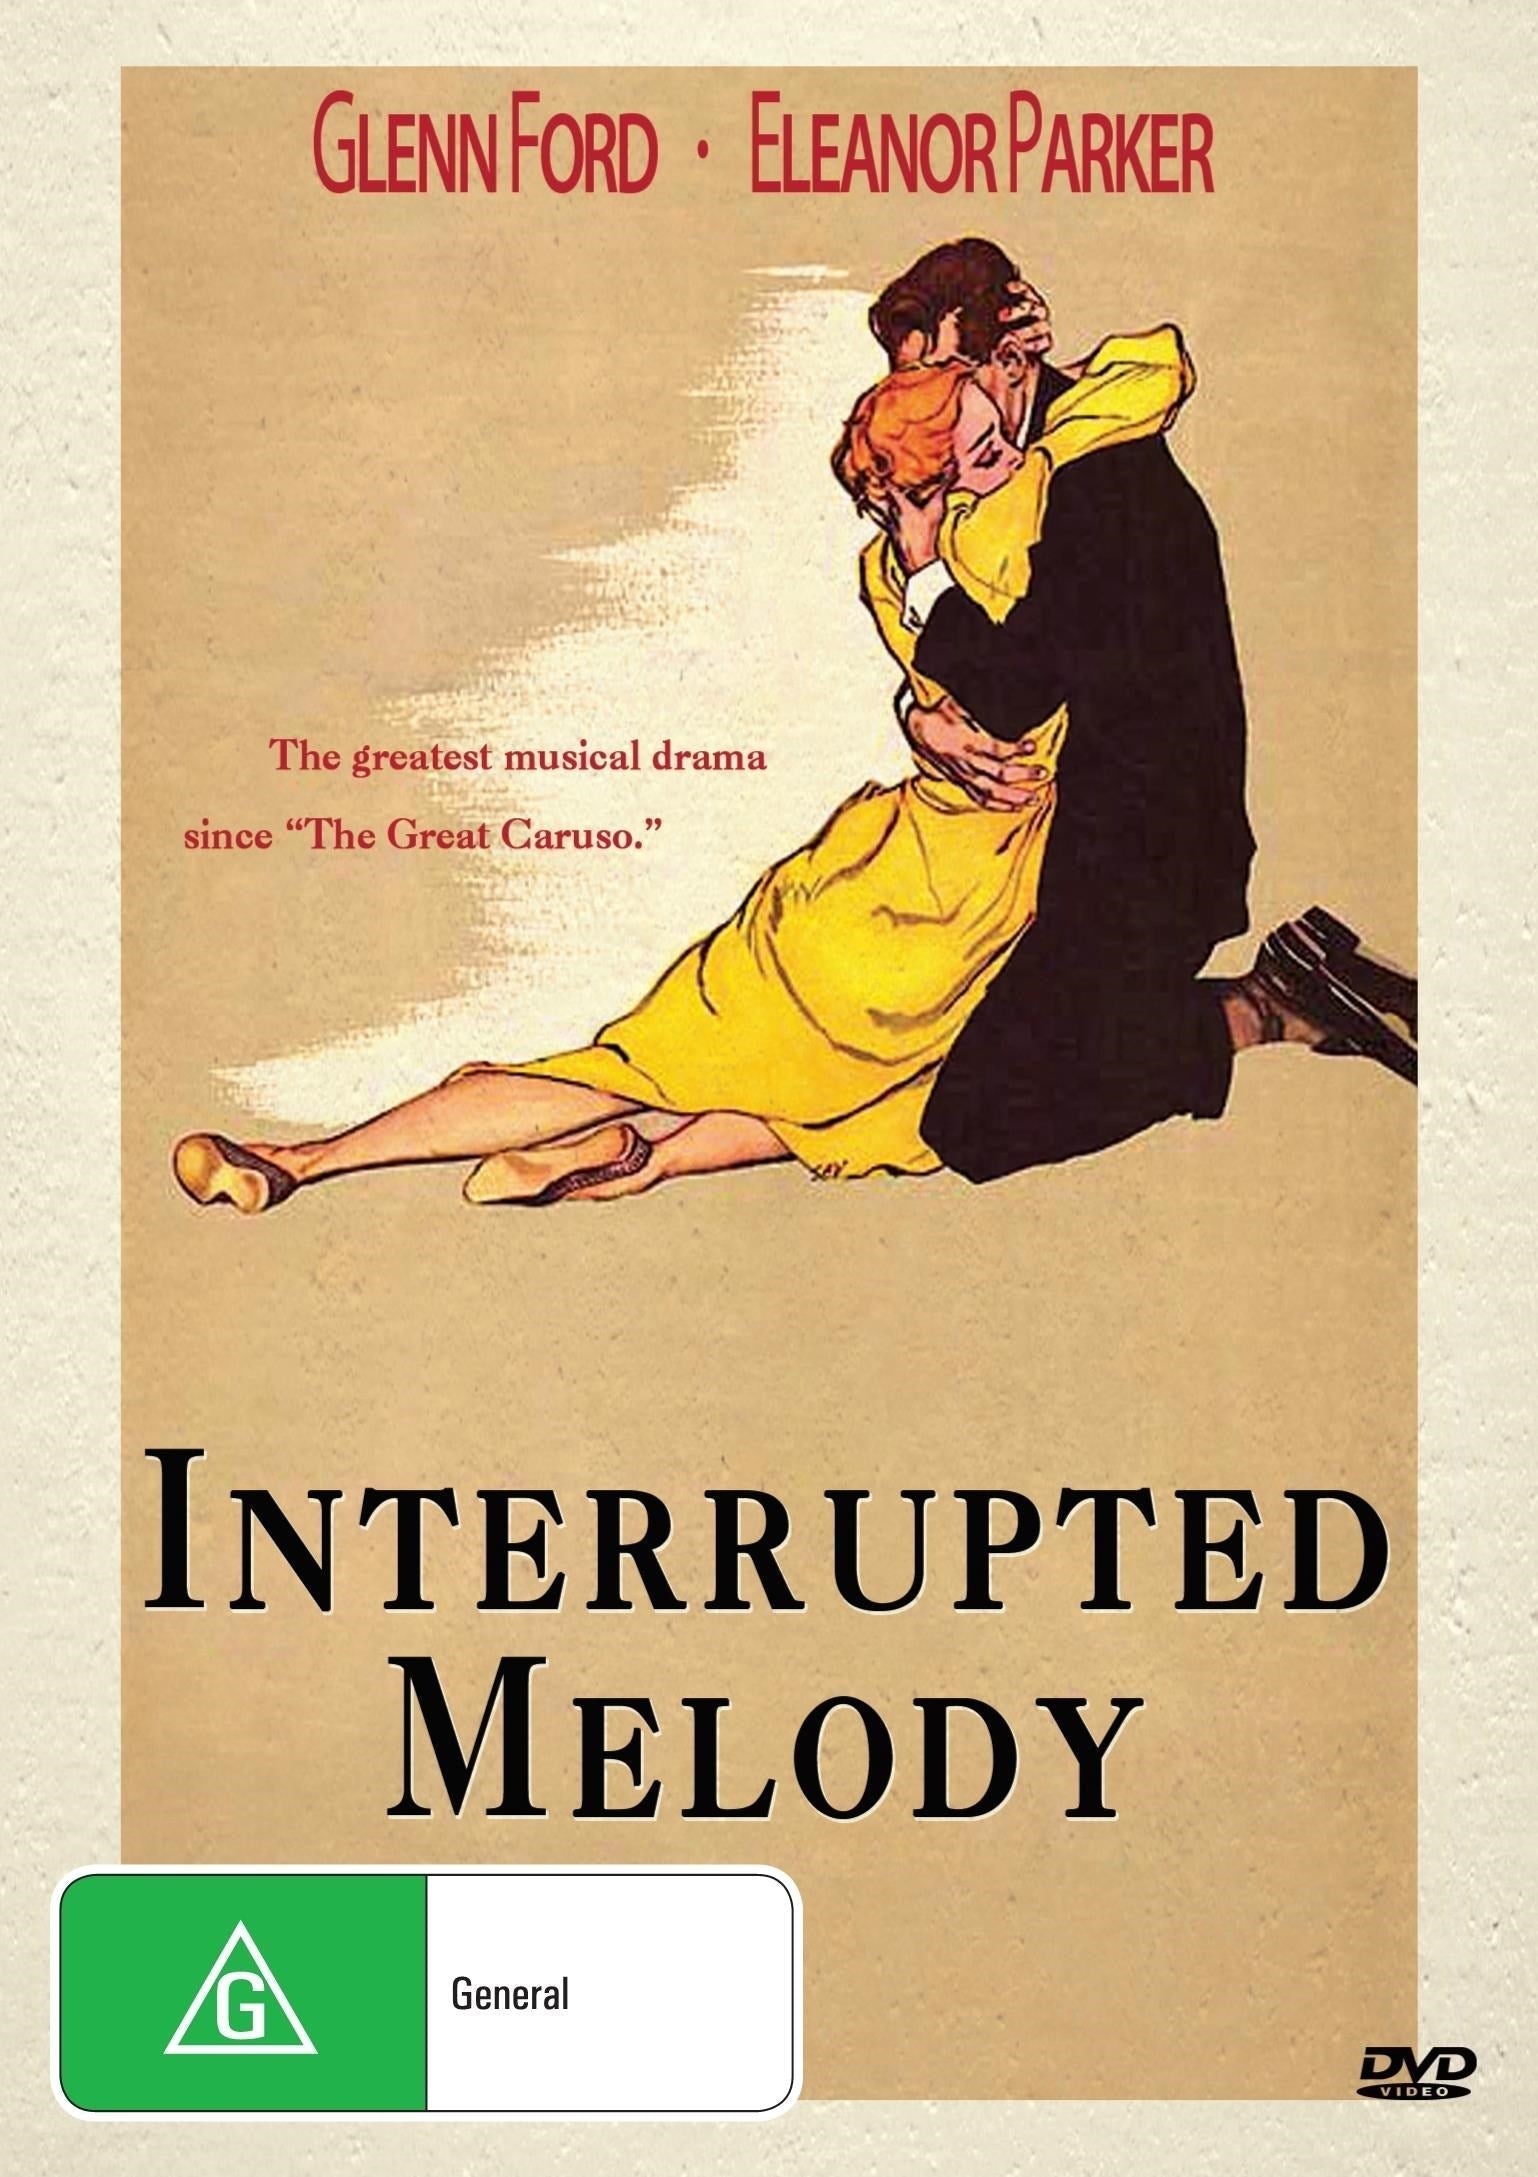 Interrupted Melody rareandcollectibledvds